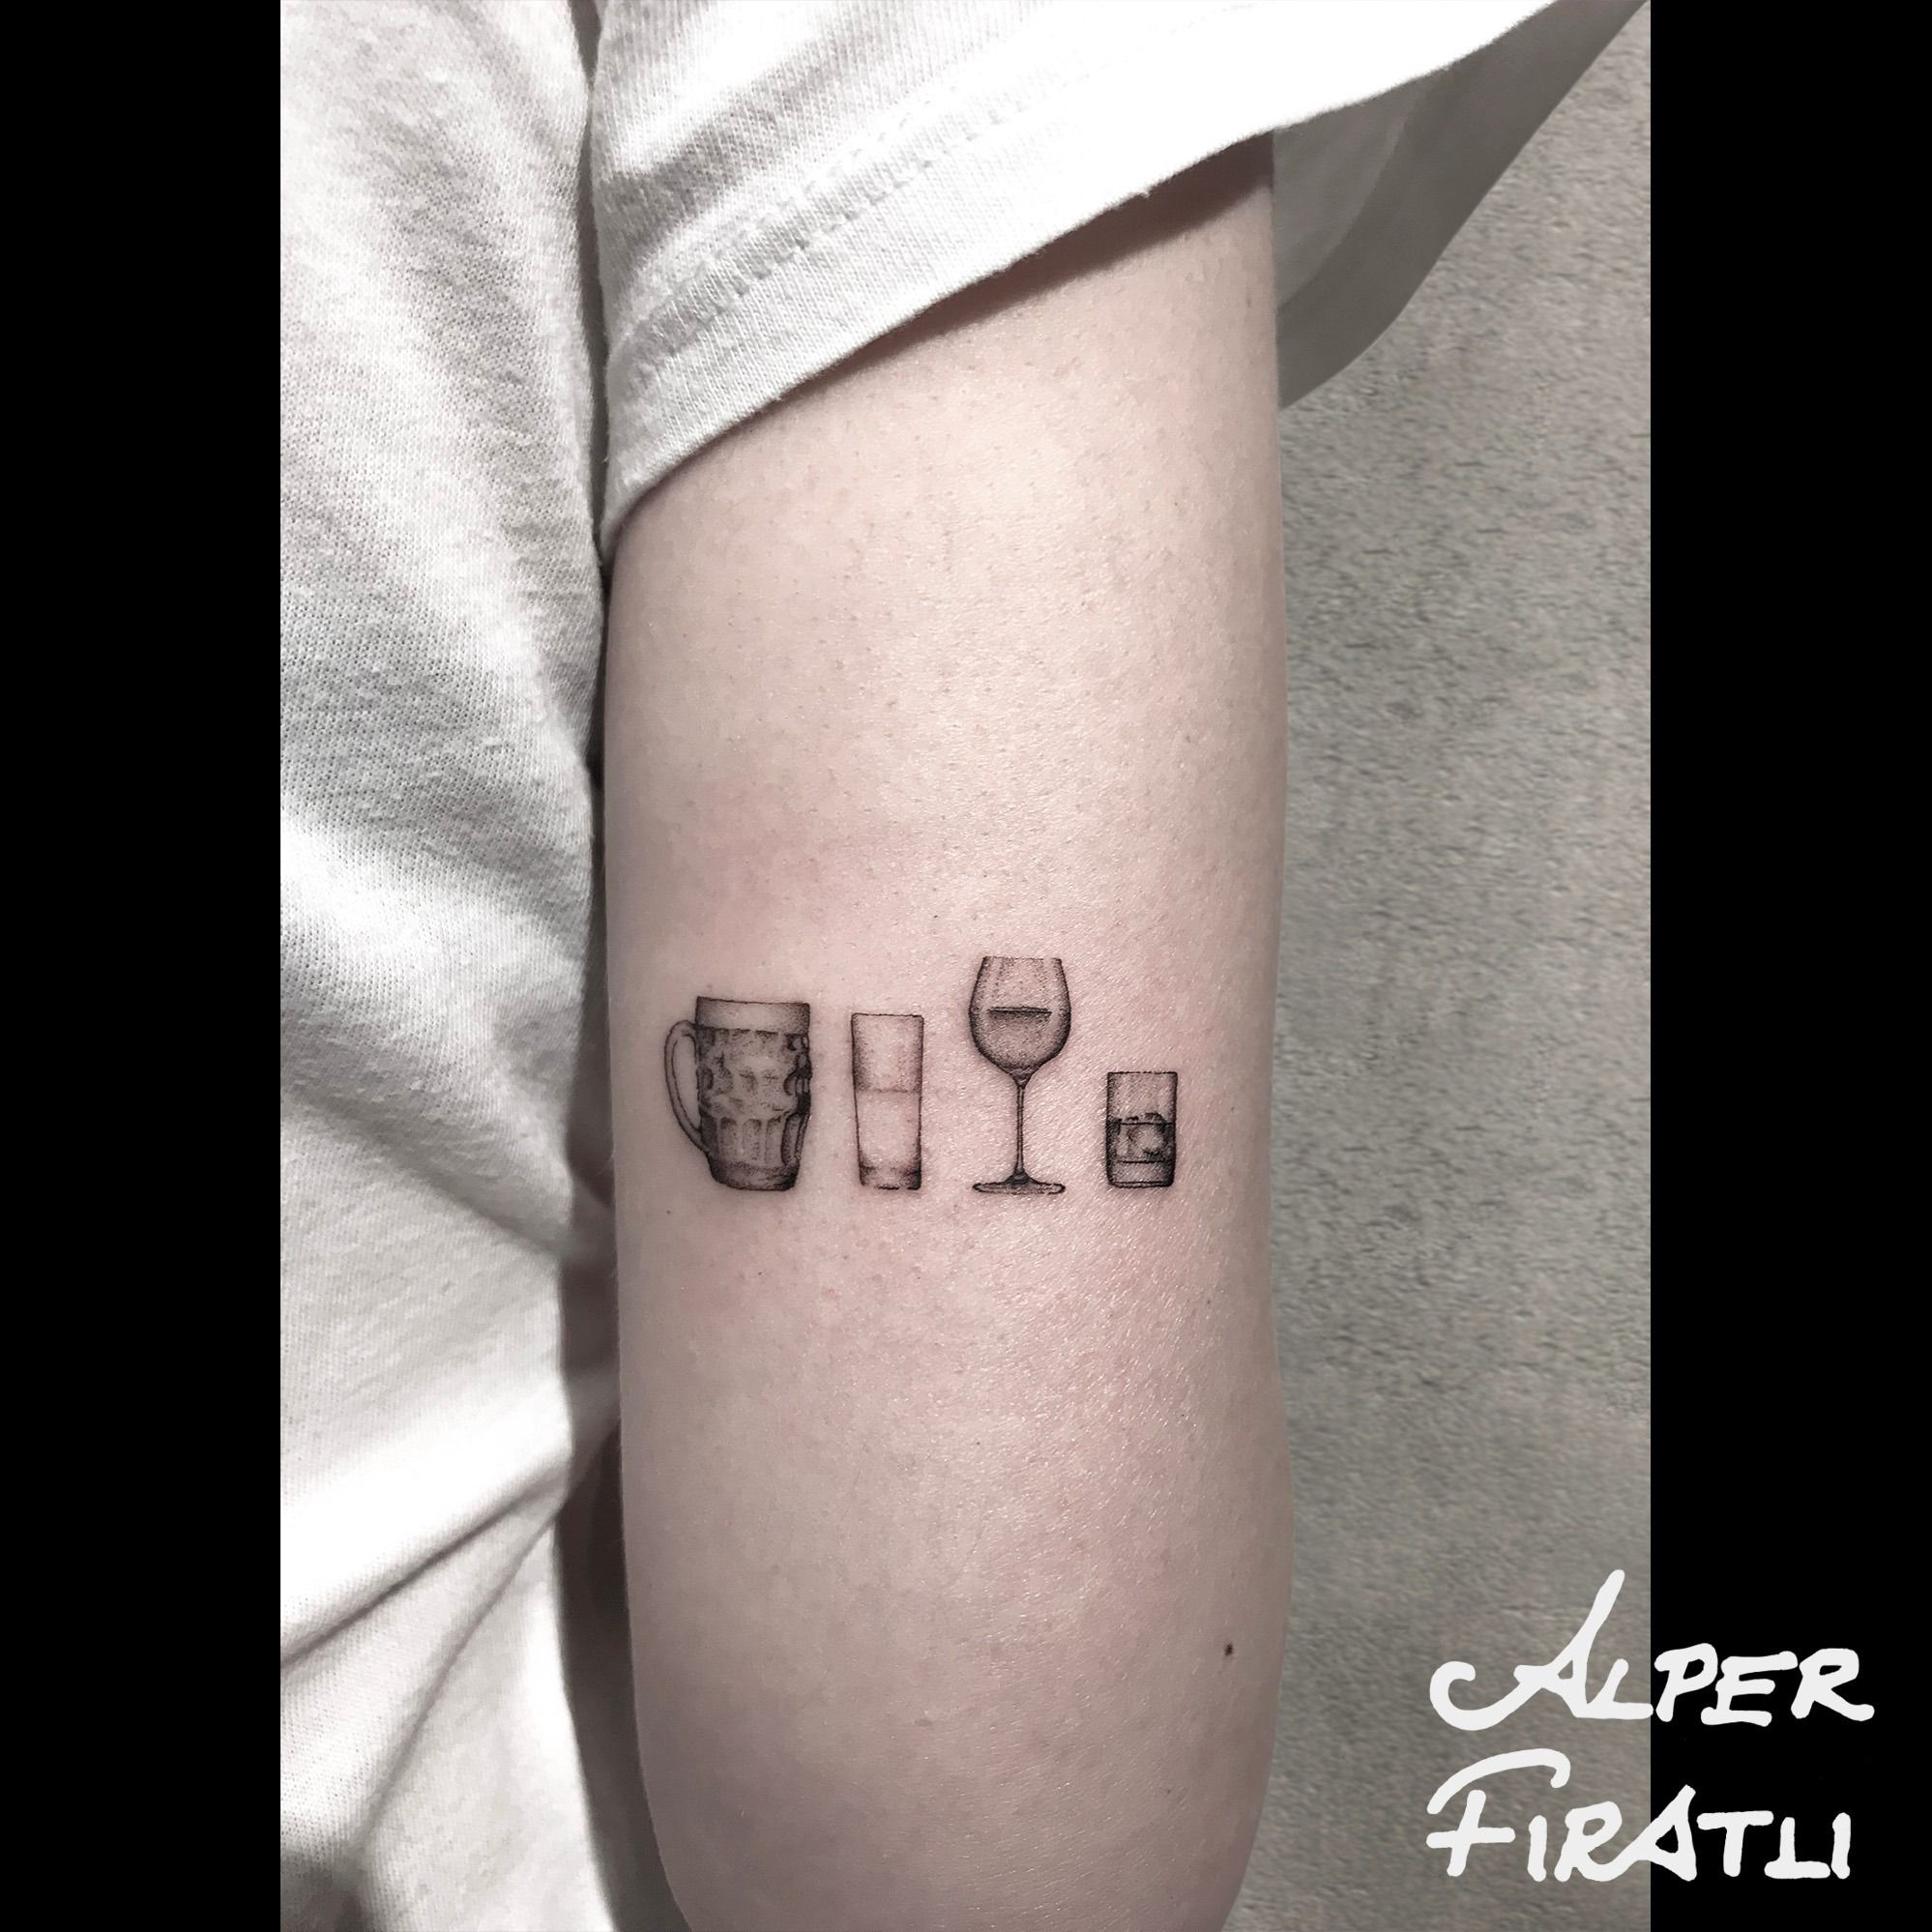 Beer done by Frank Fanti GoldHand dojo tattoo Cagliari Italy  rtattoos